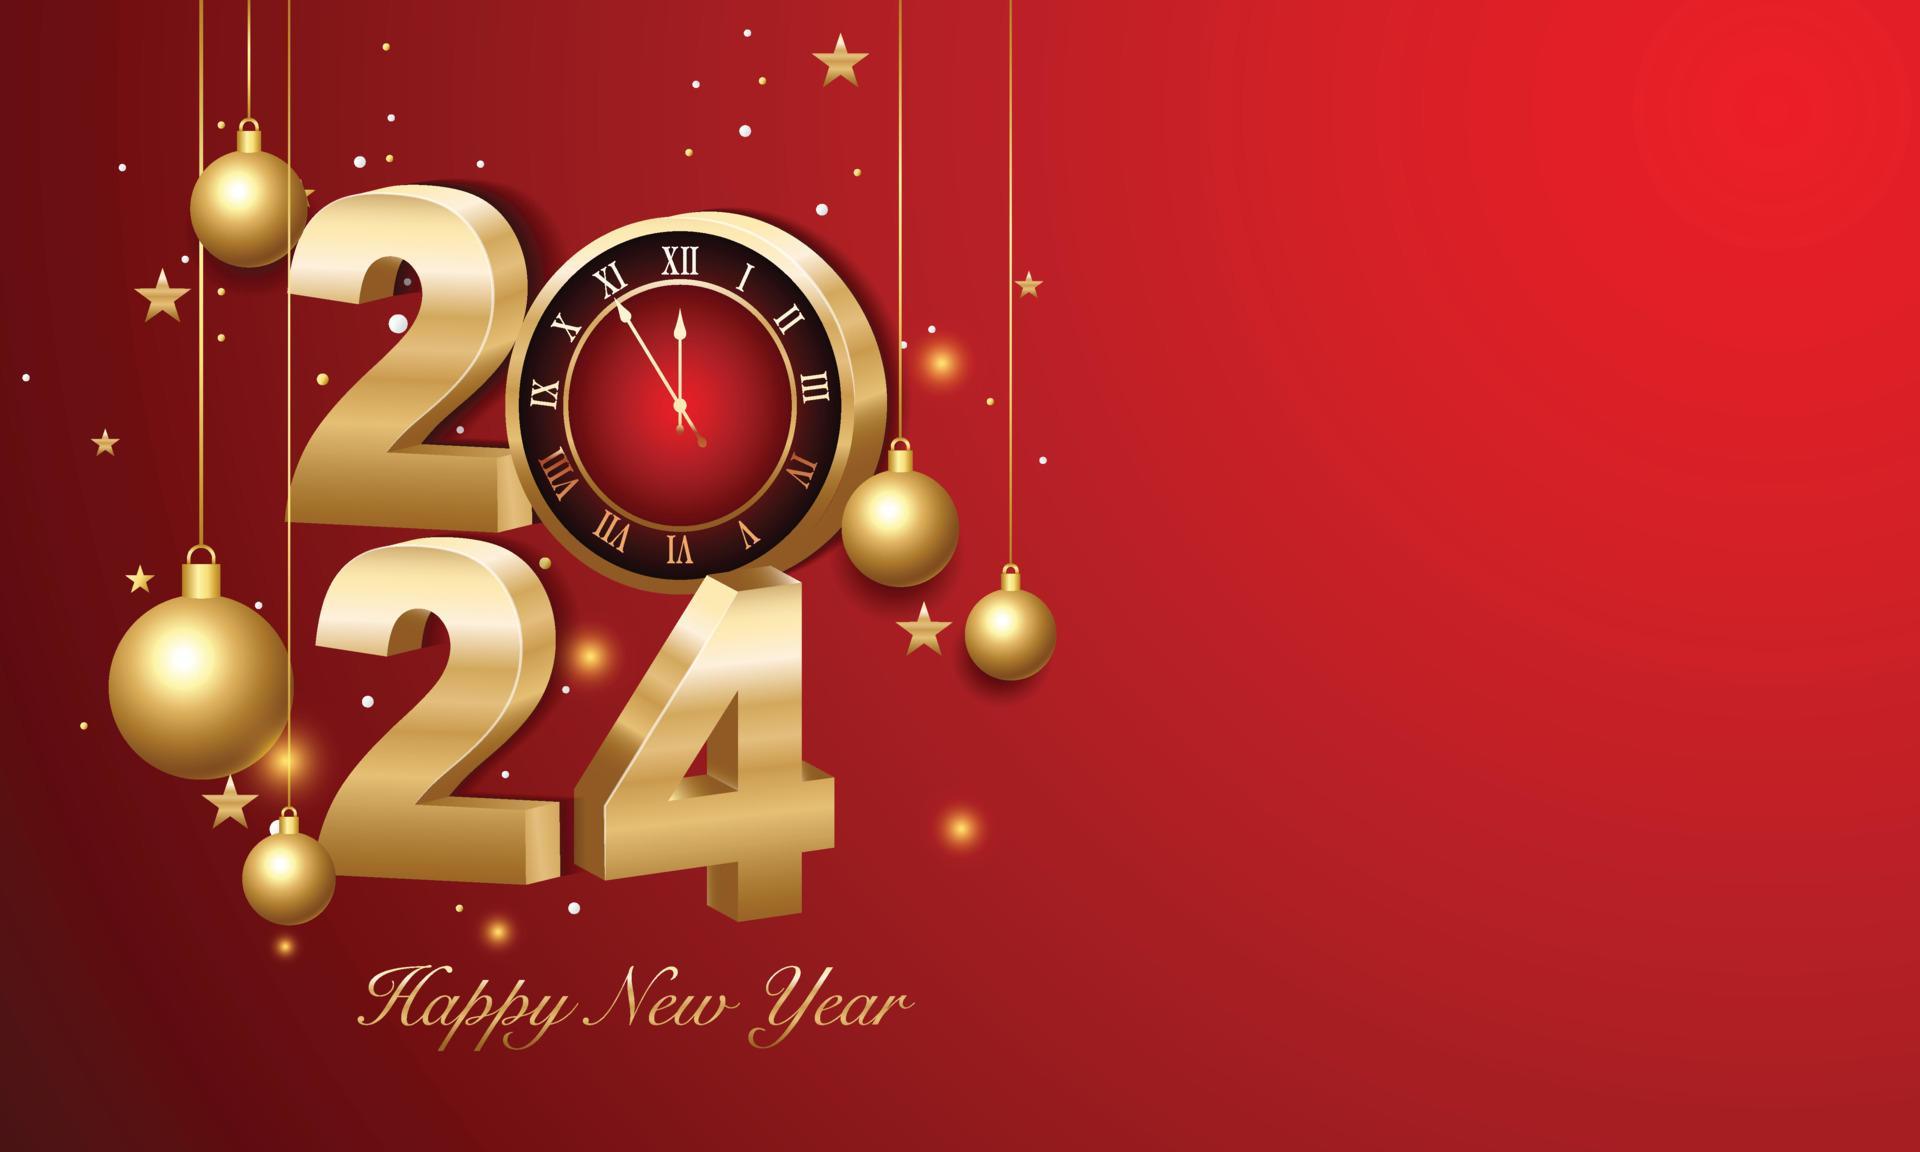 Happy New Year 2024 WhatsApp Stickers How to Download New Year